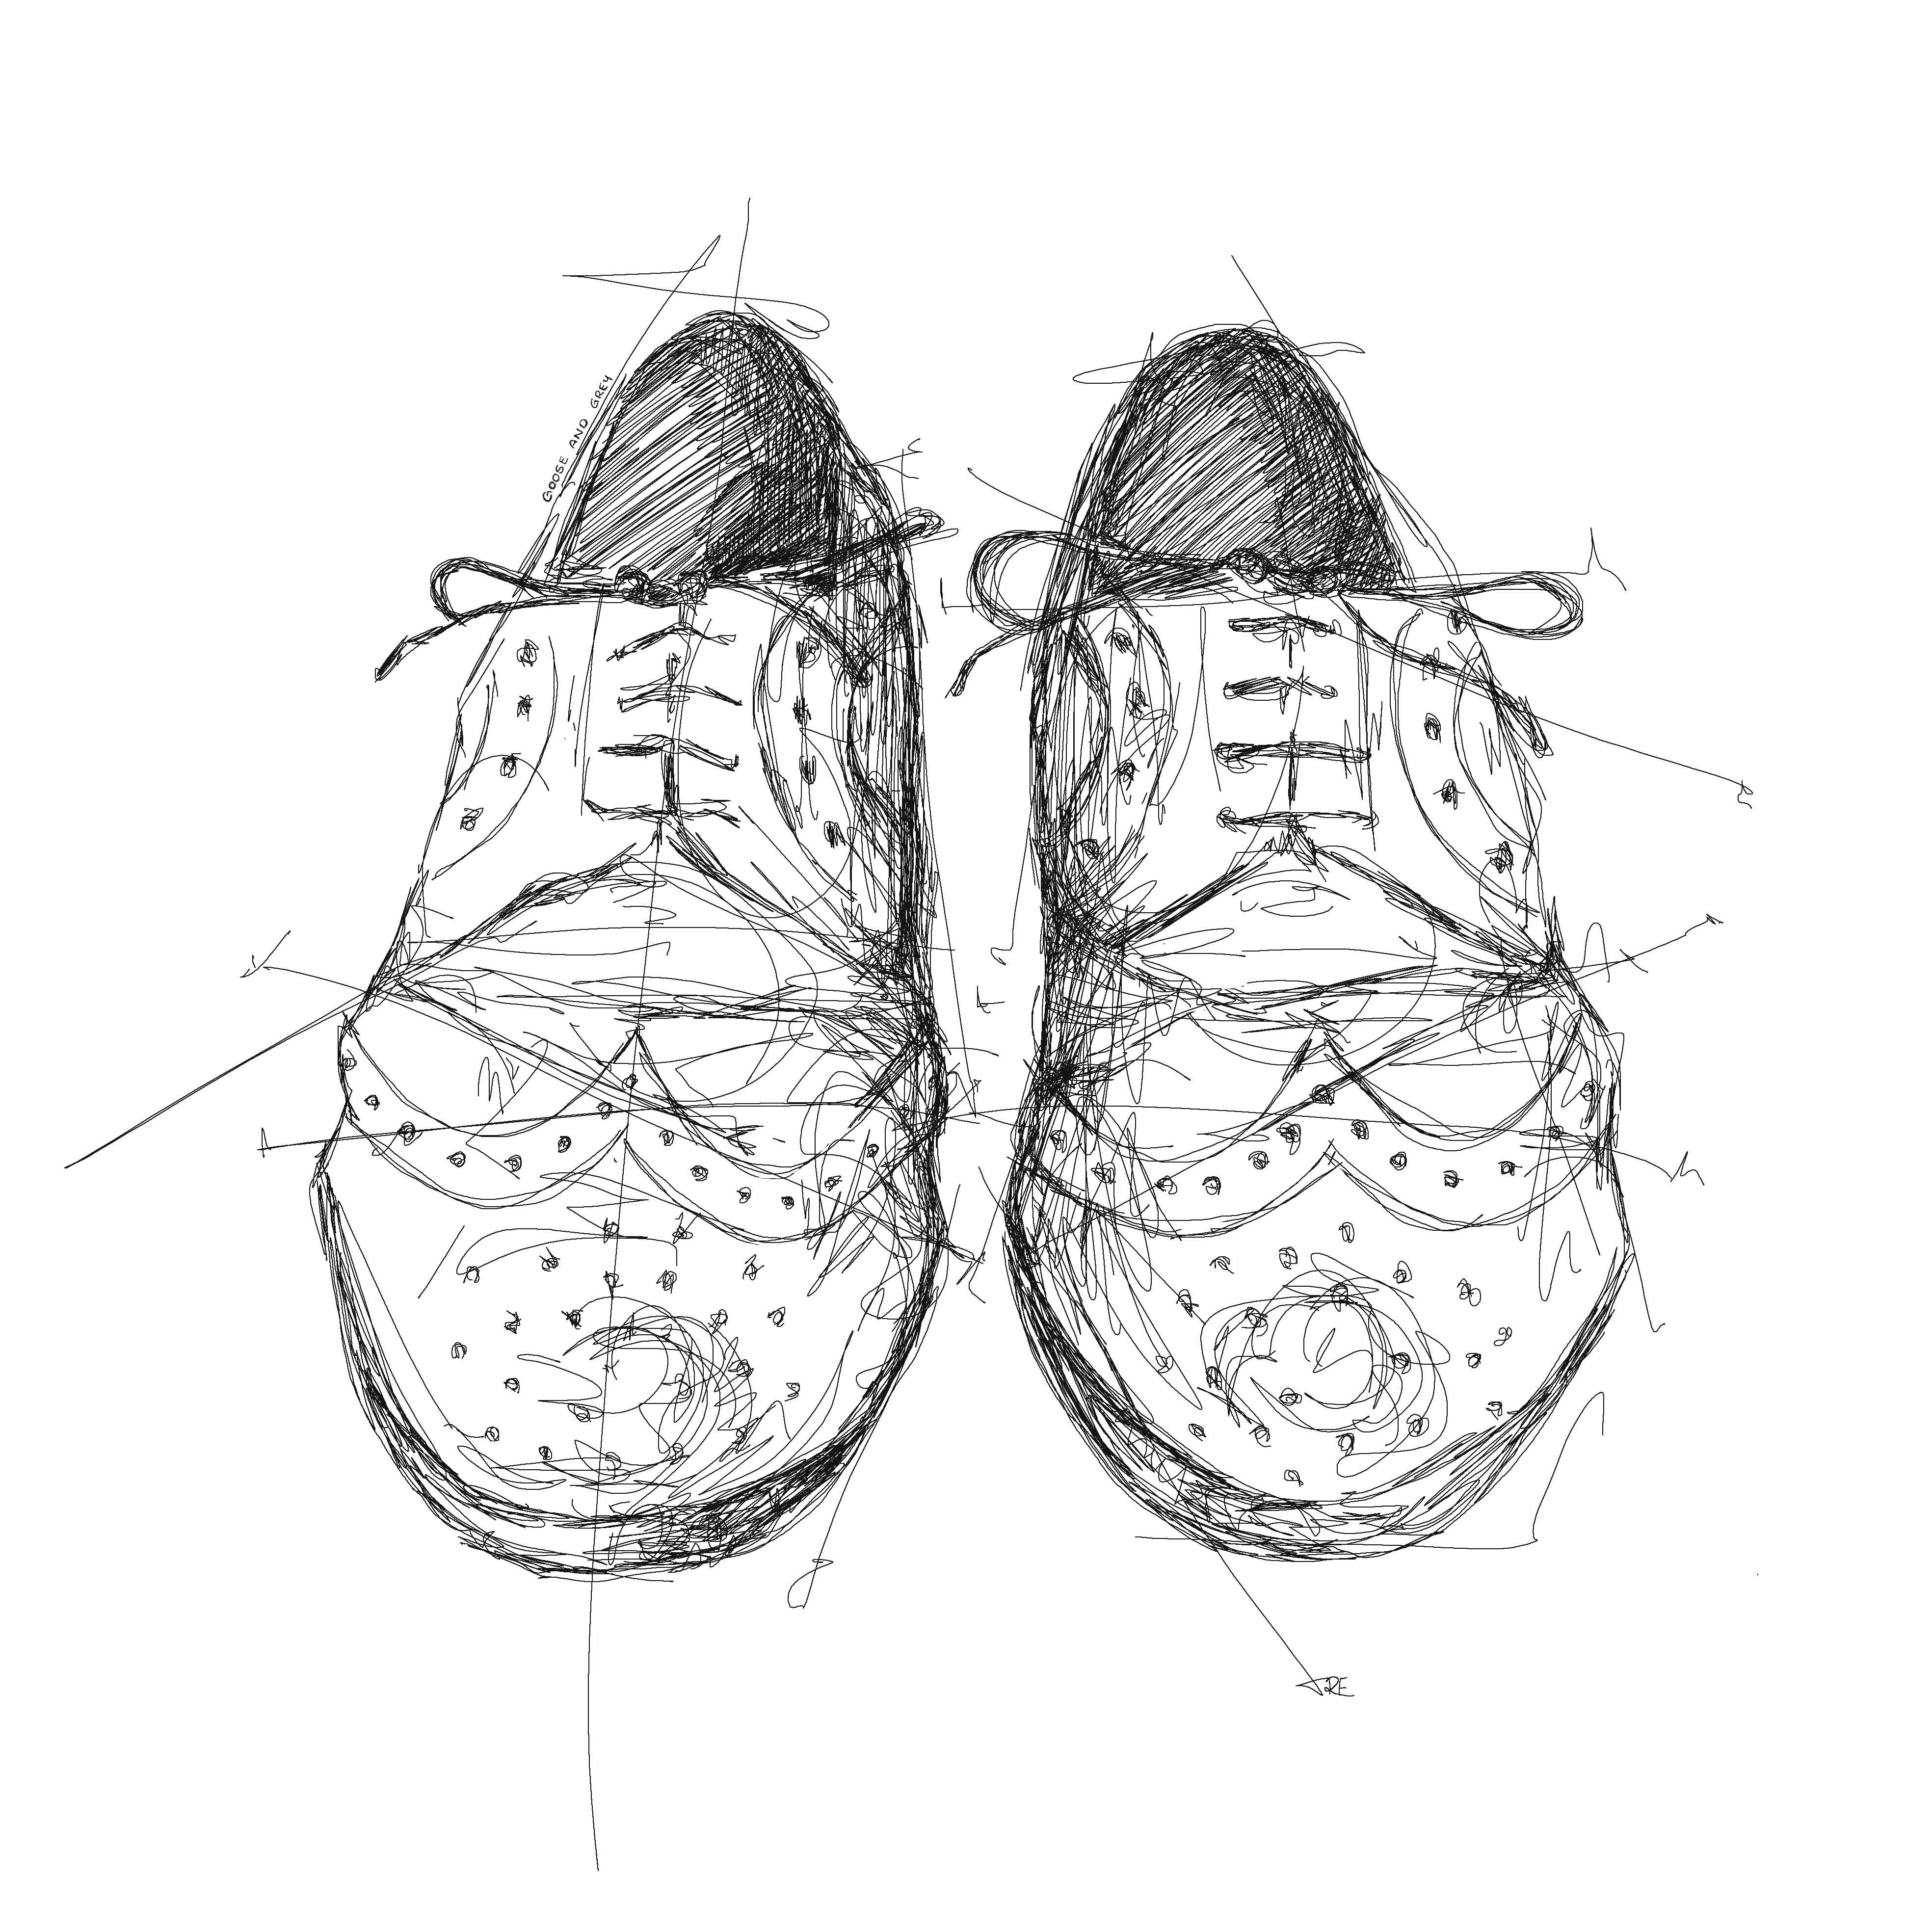 Pair Of Shoes Drawing at GetDrawings | Free download